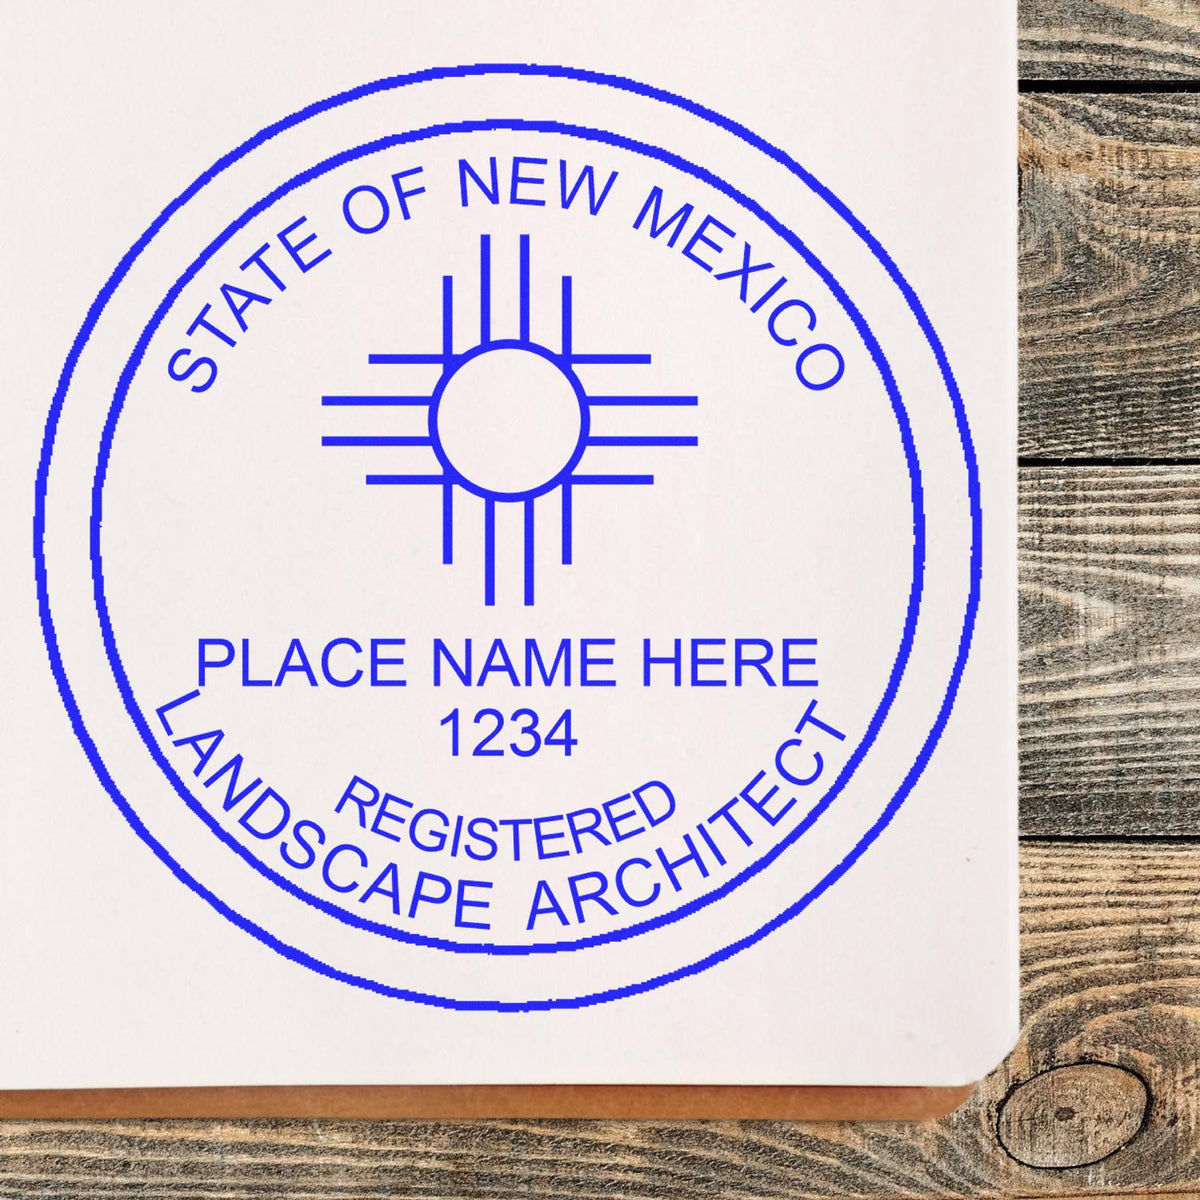 This paper is stamped with a sample imprint of the Self-Inking New Mexico Landscape Architect Stamp, signifying its quality and reliability.